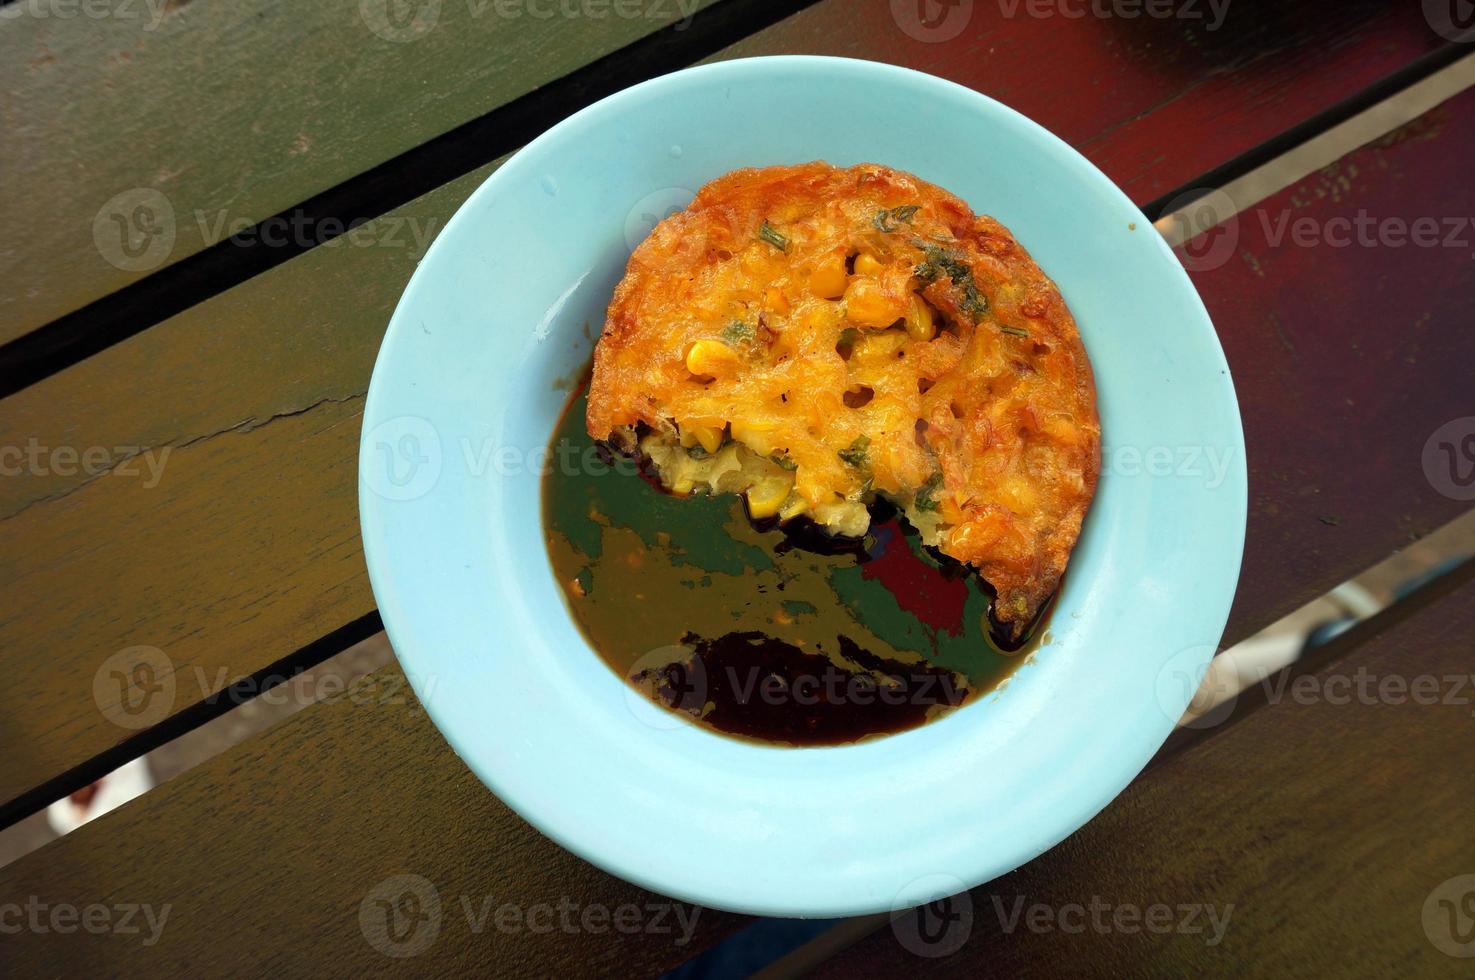 Bakwan Jagung or Corn Fritters. Corn Fritters already eaten with soy sauce Petis photo